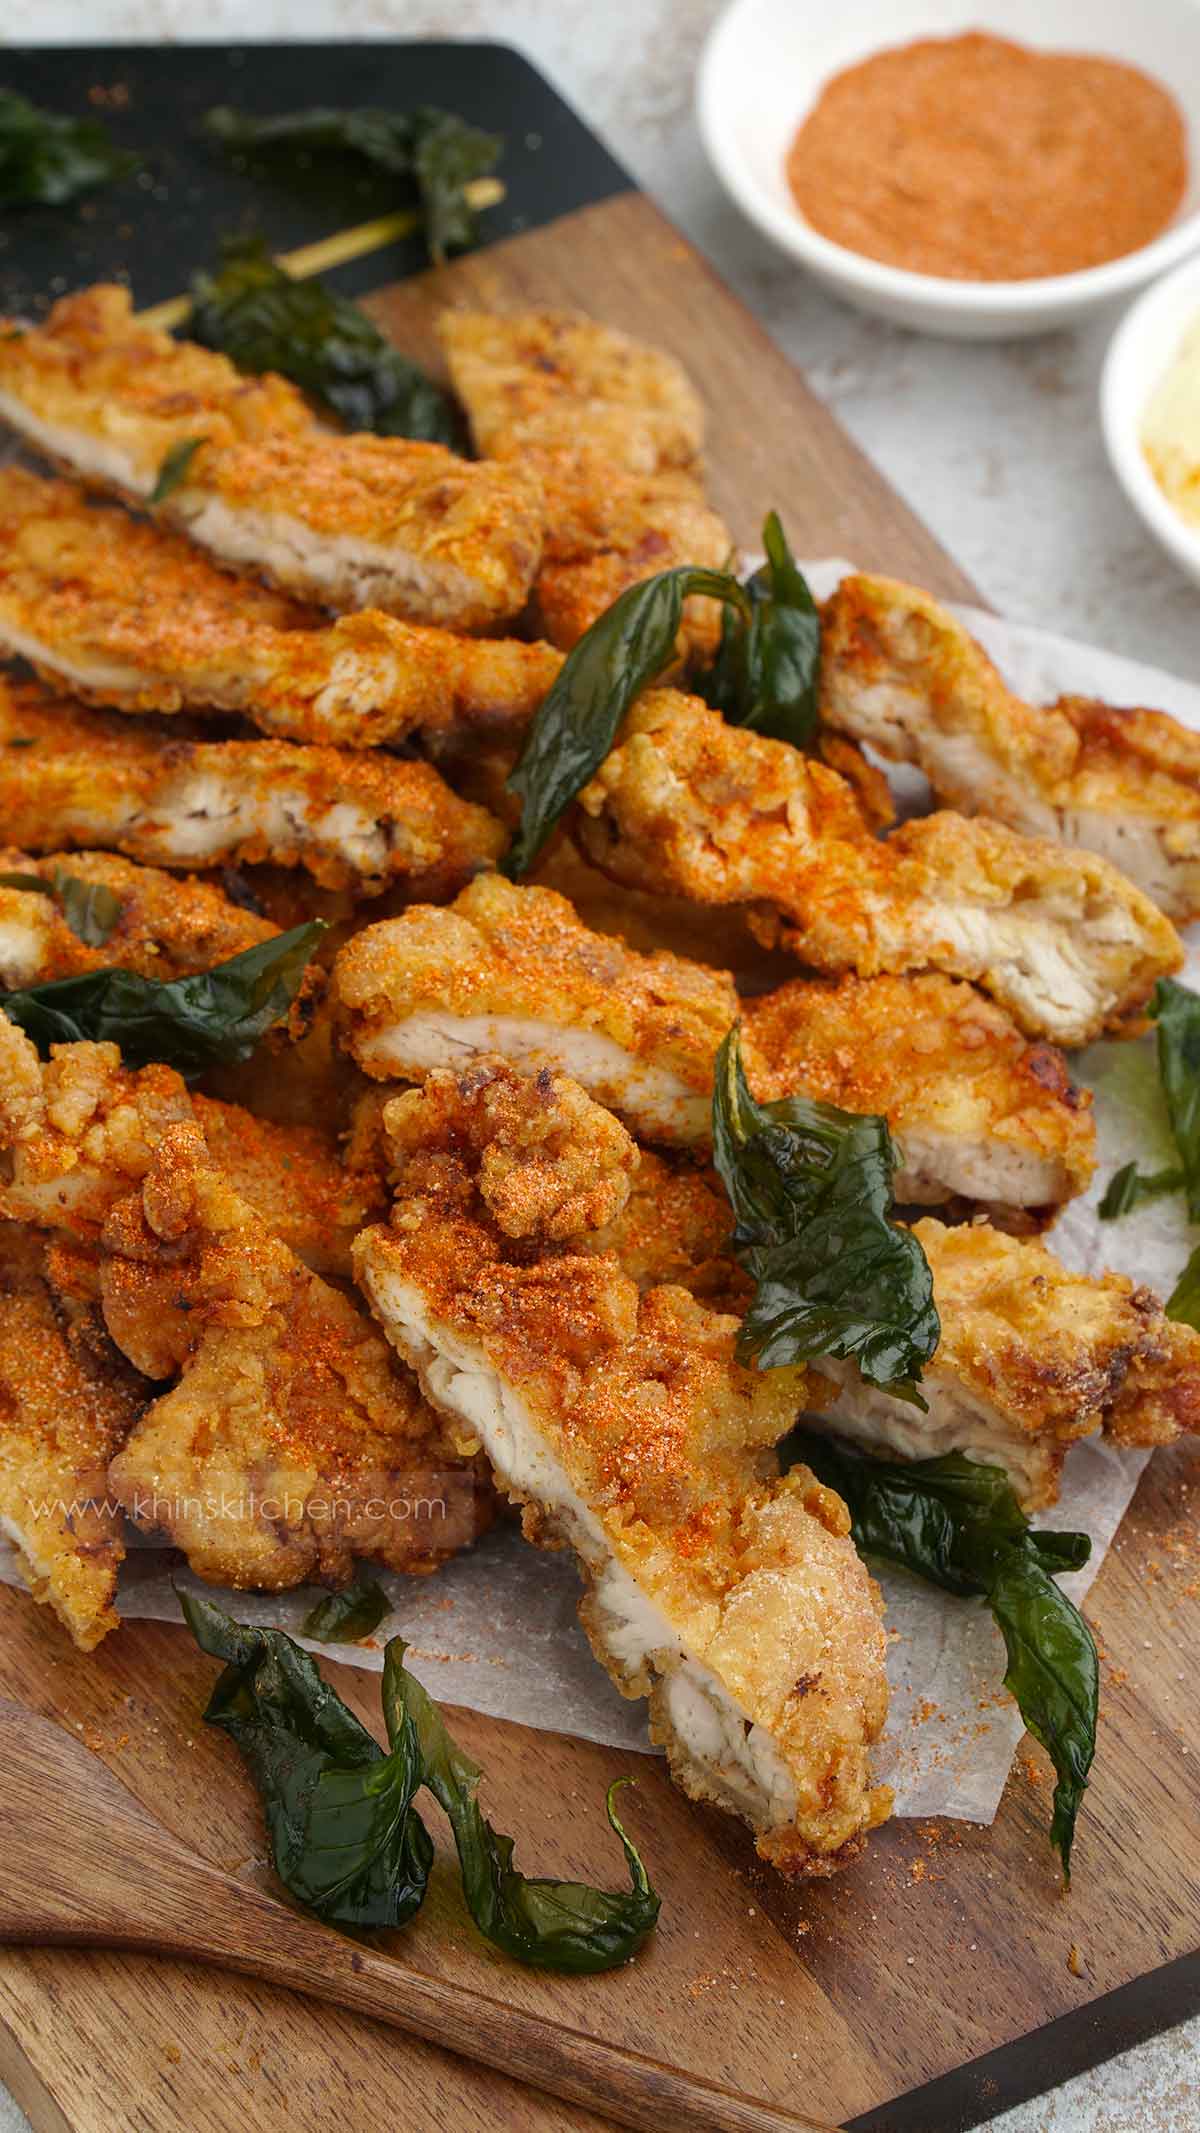 sliced fried chicken and crispy fried basil on the serving tray.